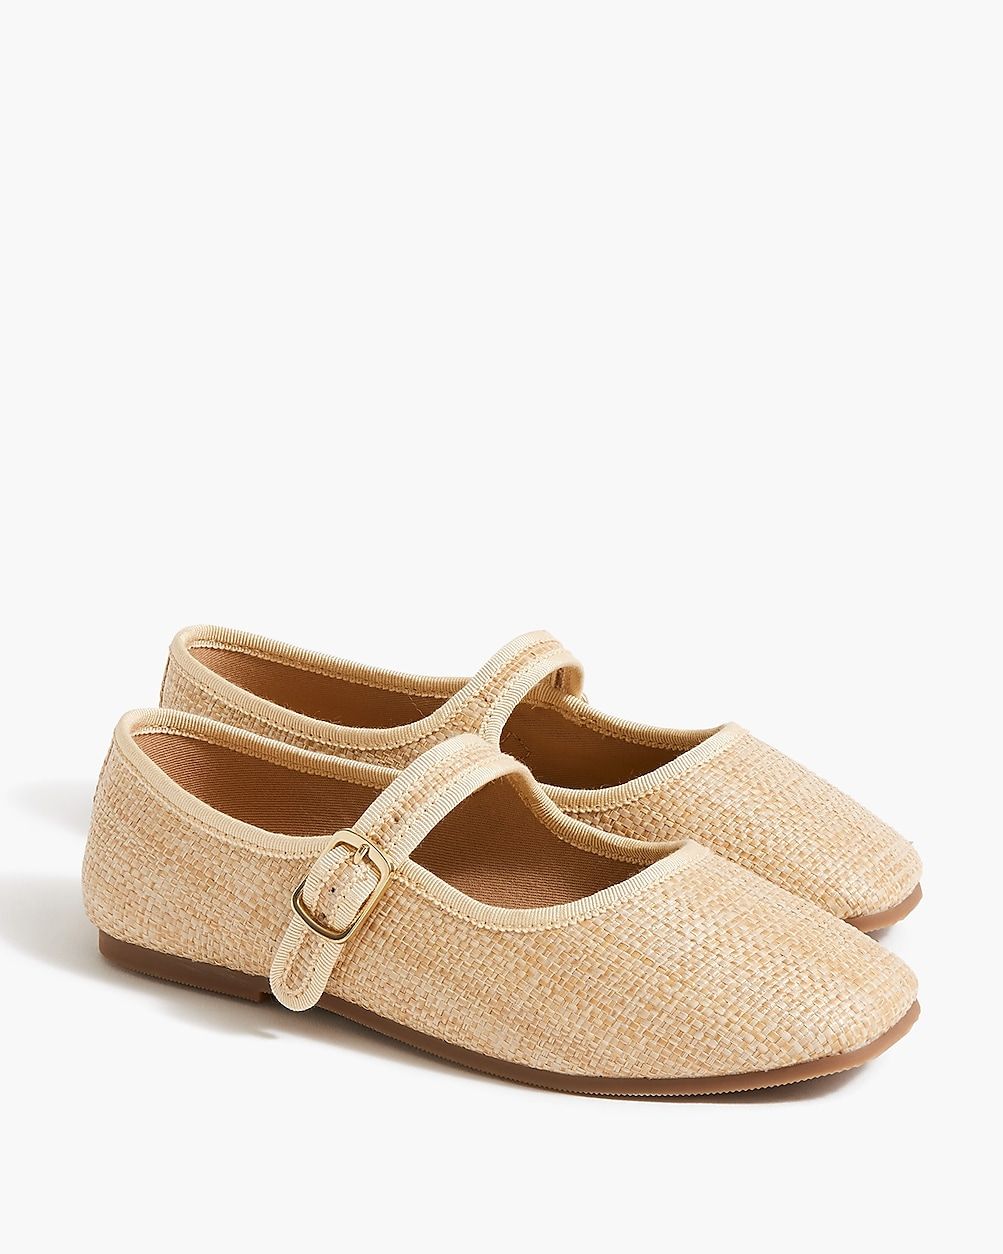 Girls' woven Mary Janes | J.Crew Factory